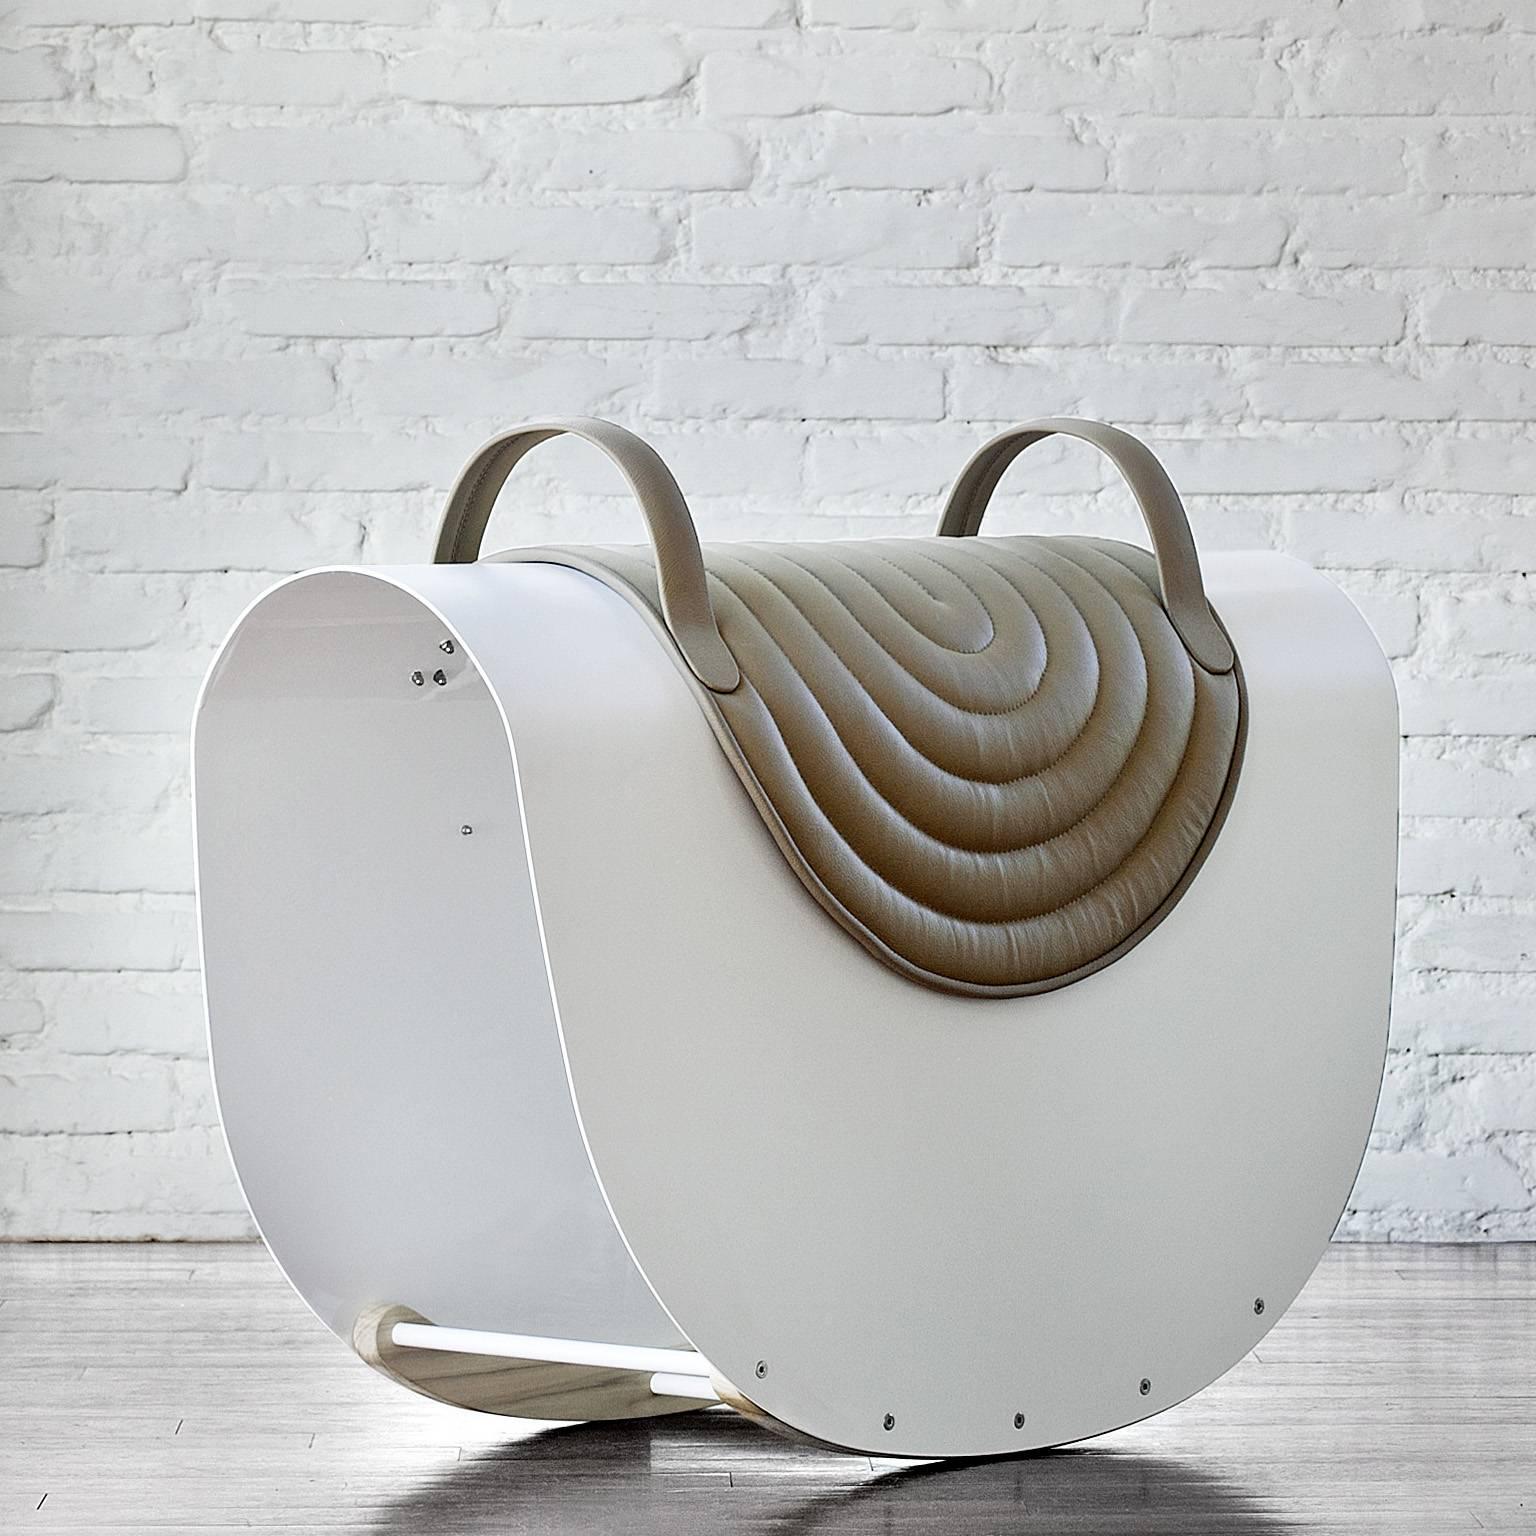 With this Rocker, Lanzavecchia + Wai demonstrate how children’s play, through a sophisticated design process, can be transformed into refined grown-up objects with meaning and intent. It combines skillful craftsmanship with serial production and